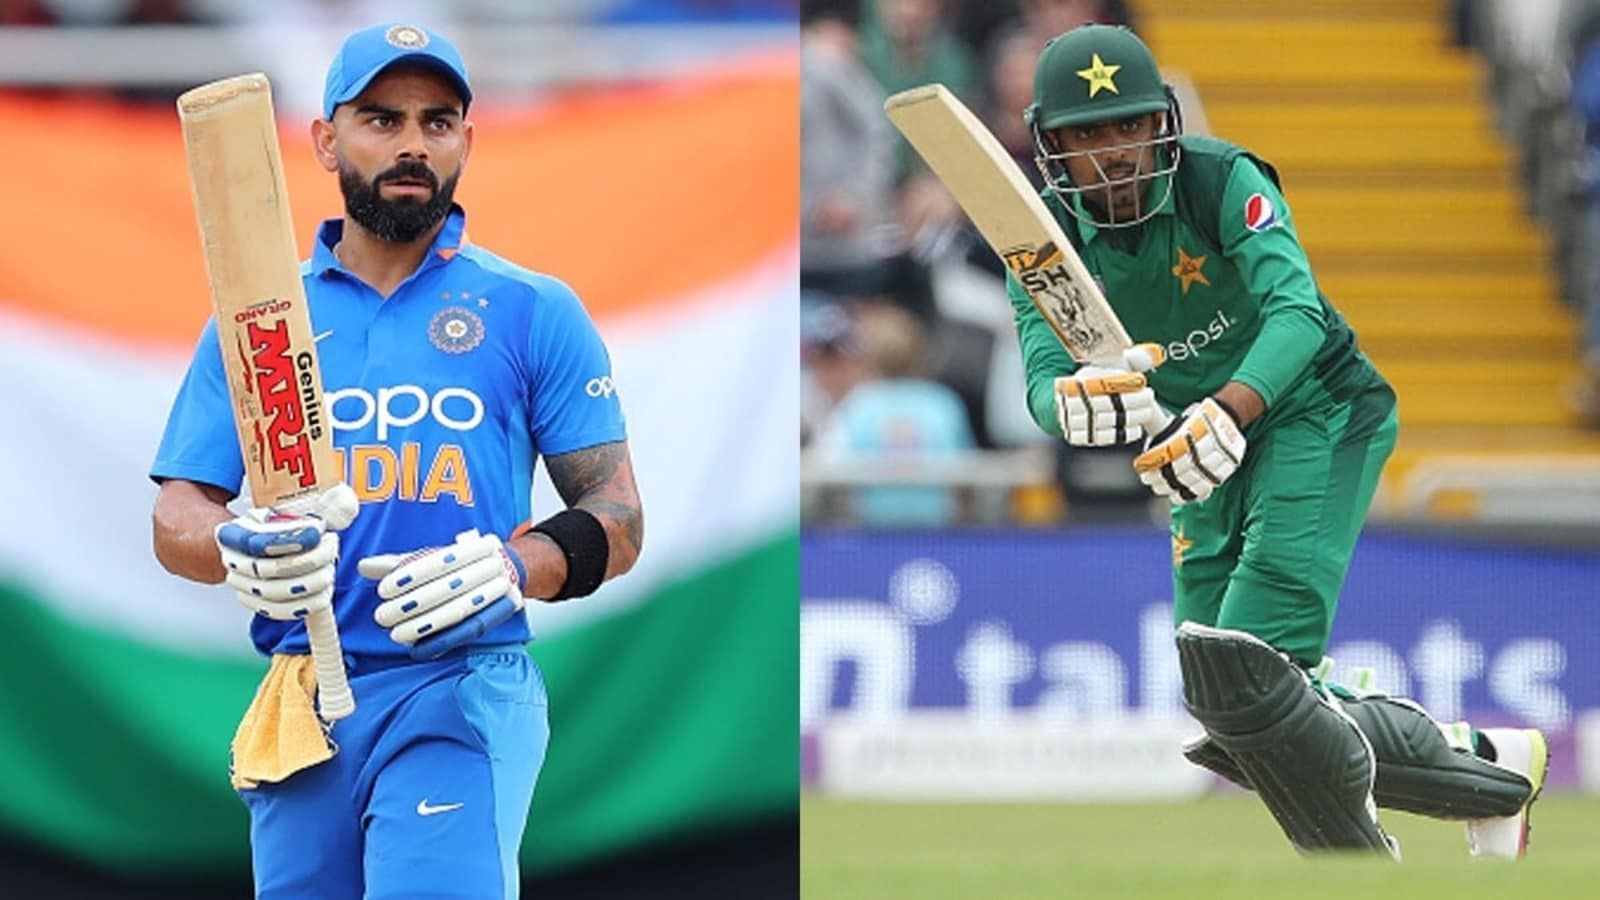 Virat Kohli (L) and Babar Azam (R) have been the most consistent batters for their nation